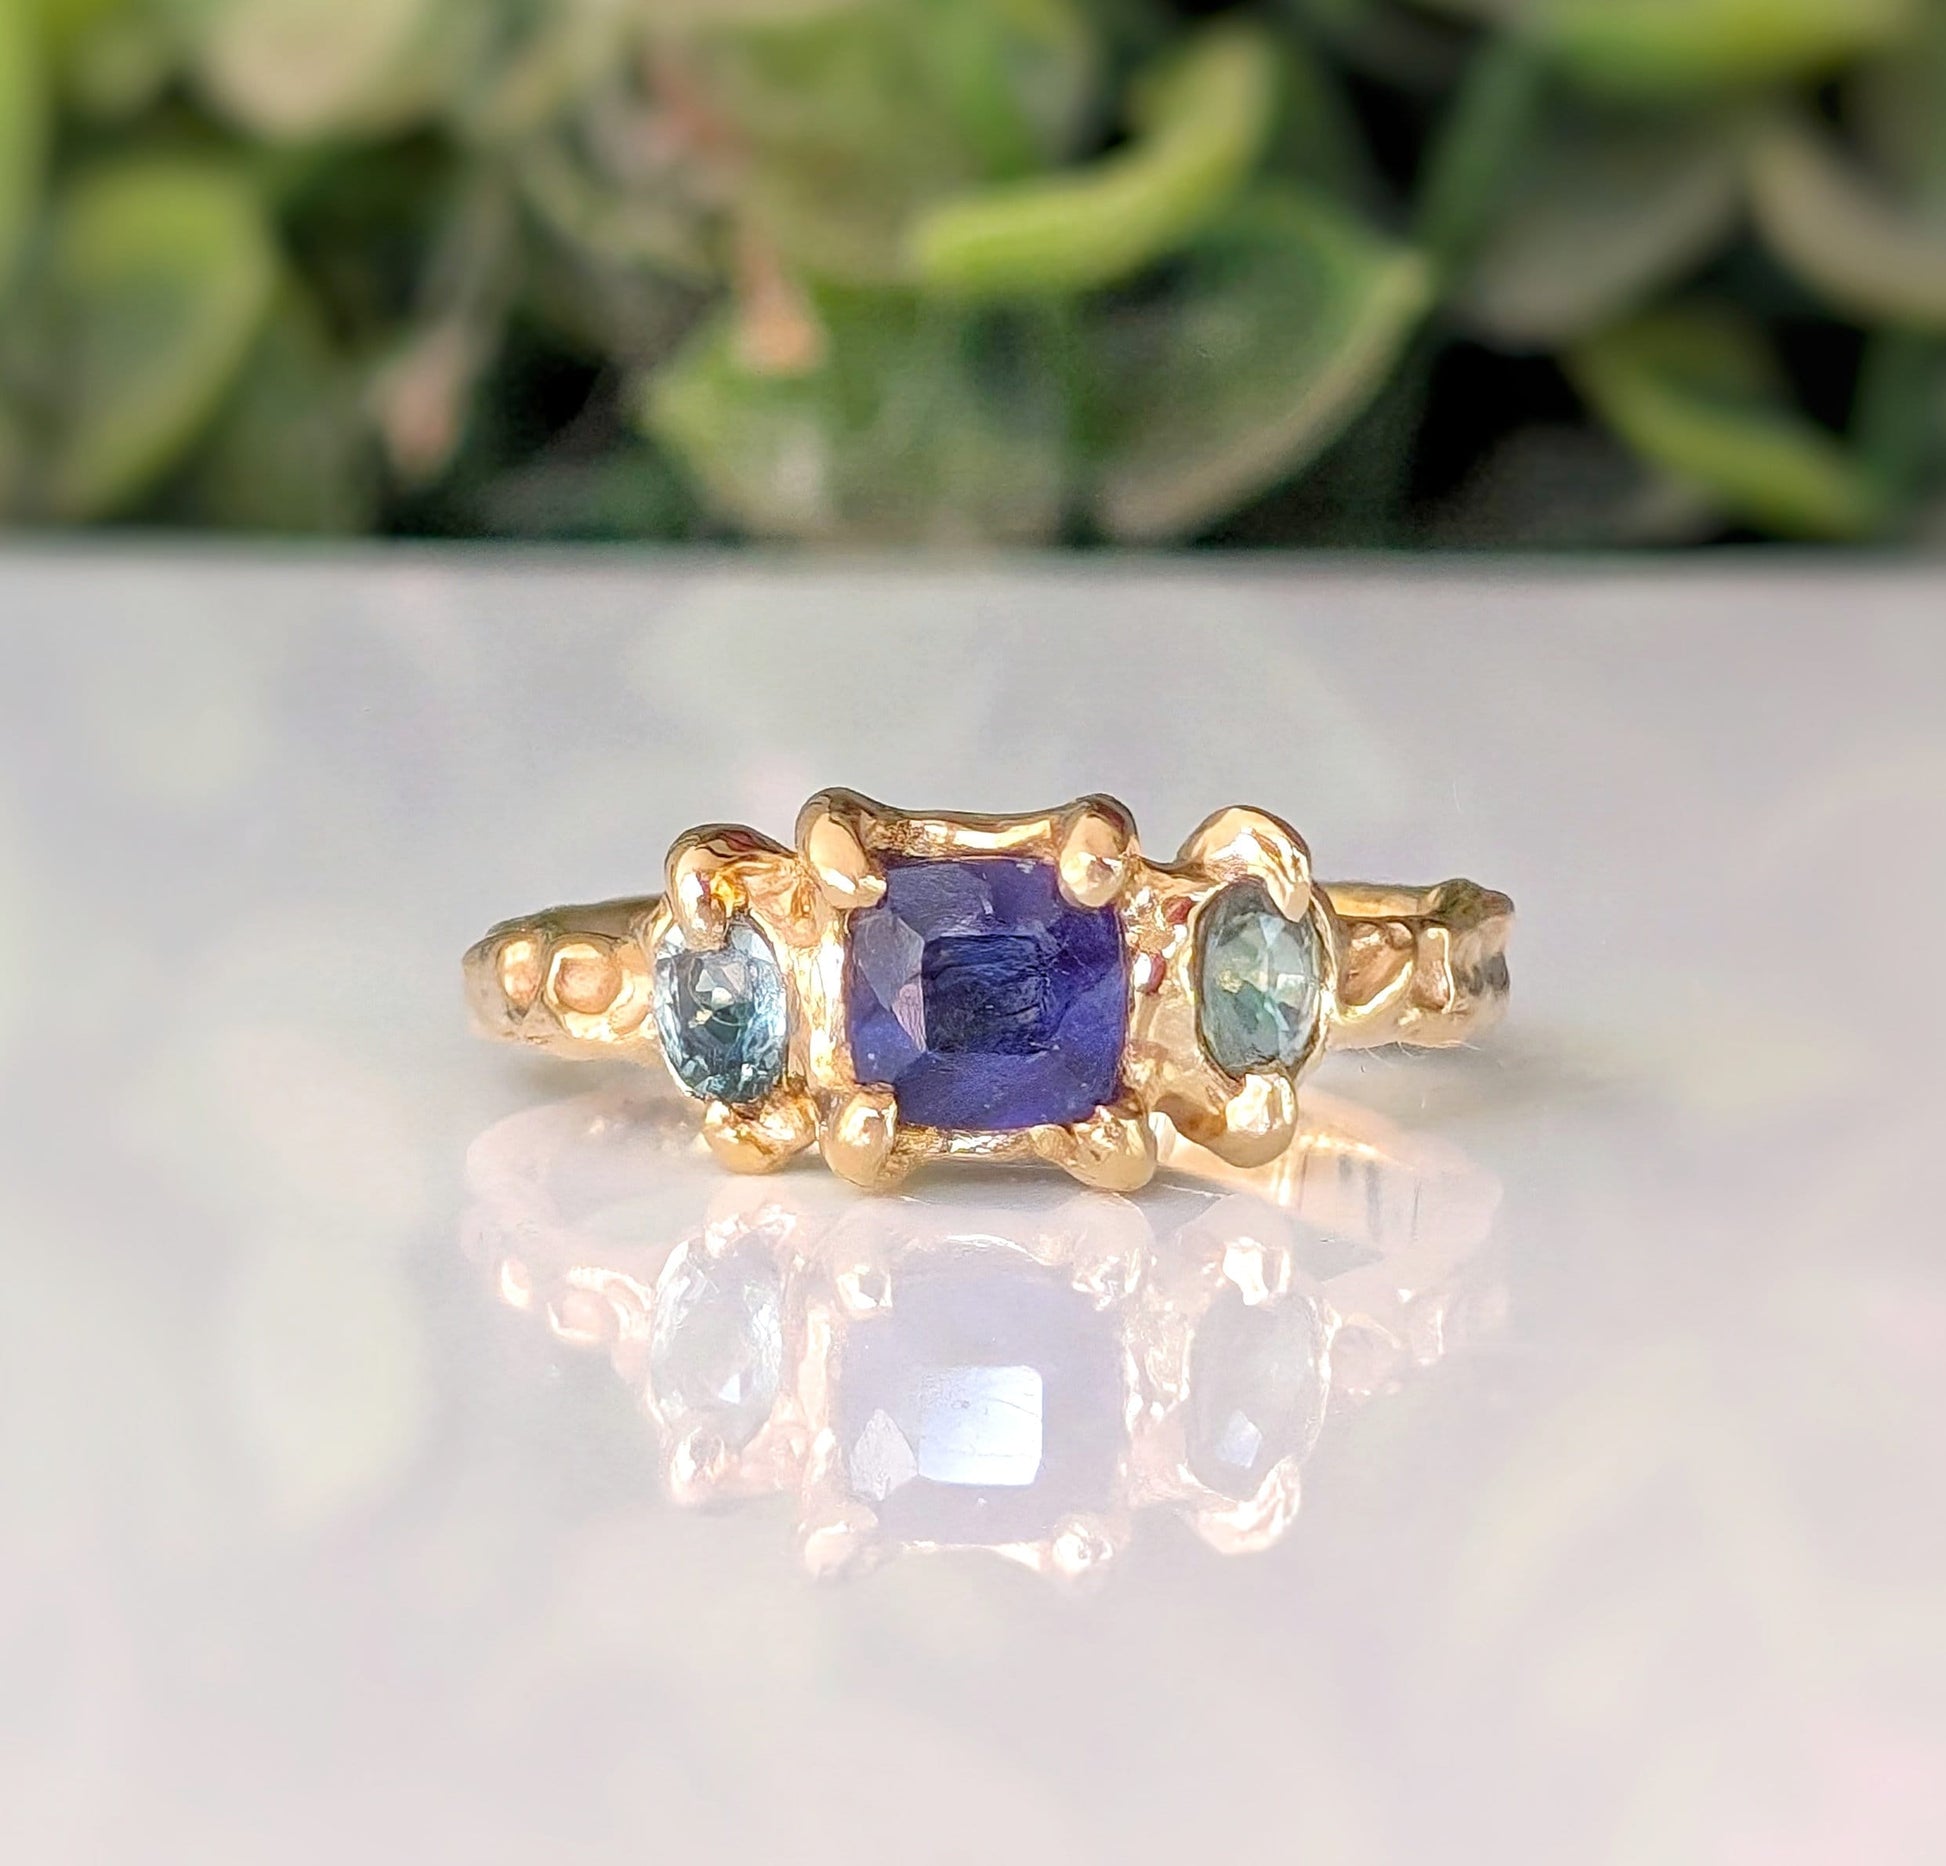 Blue Sapphire and Tourmaline ring in textured molten Gold setting